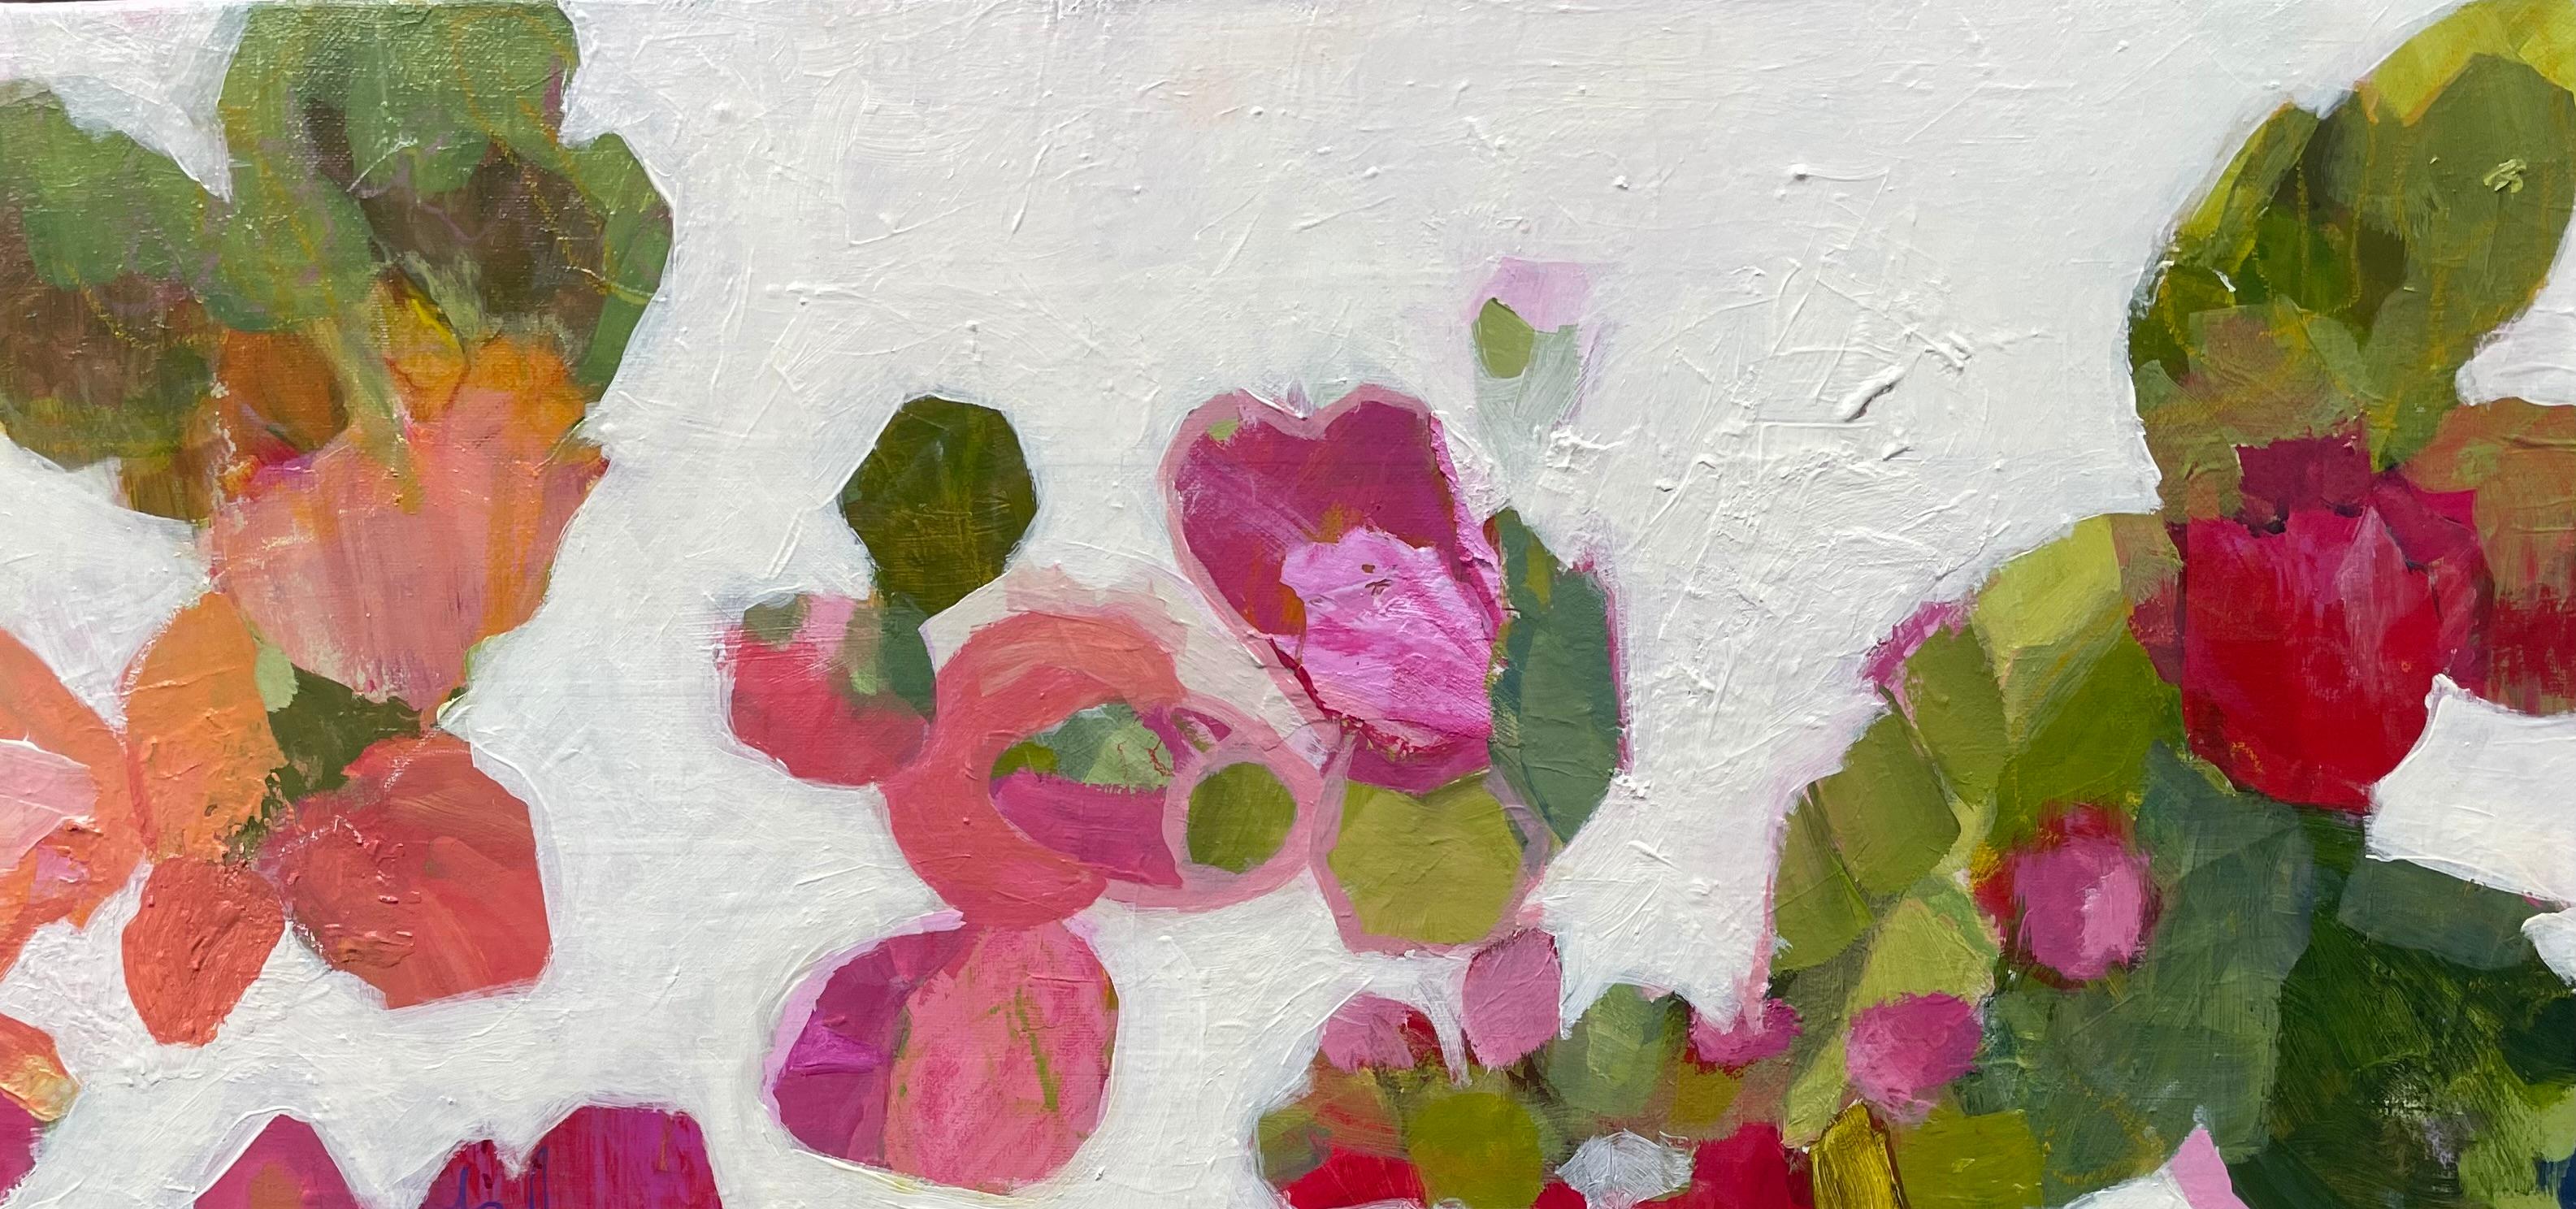 Until We Meet Again  is an contemporary abstract  painting by Texan artist Eleanor McCarthy.  It can also be described as a abstract floral painting. Eleanor McCarthy uses acrylic paints on canvas to create the soothing colors in her new